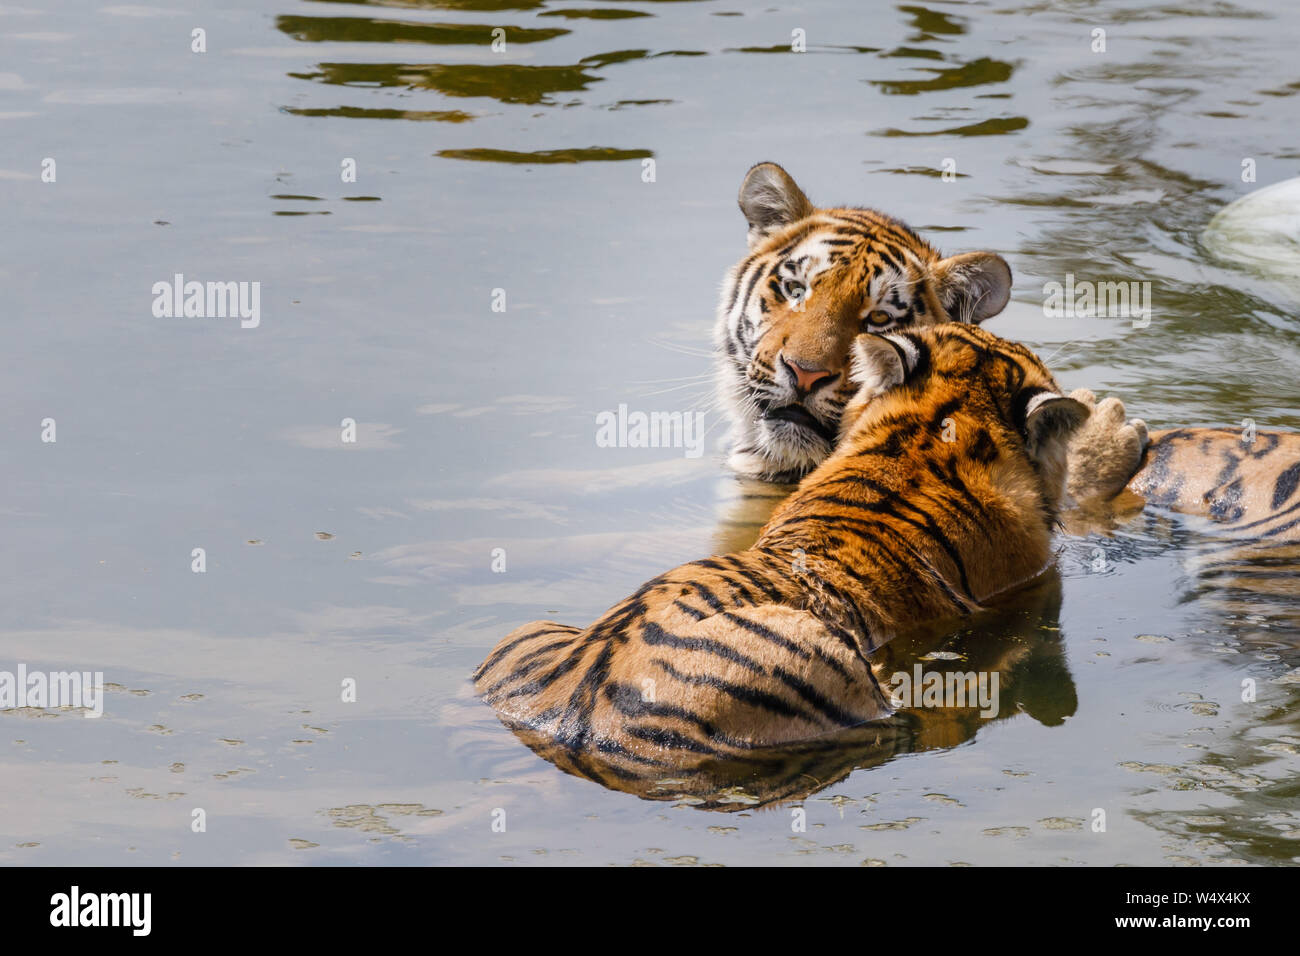 ZSL Whipsnade Zoo, Bedfordshire. 25th July 2019. UK Weather: Animals splash around in the water to cool down at ZSL Whipsnade Zoo.Record breaking heatwave, with temperatures of up to 39 degrees have been recorded across the UK.  13 month old Amur tiger cubs, Makari and Dmitri, cool off in the pond in Tiger Falls, ZSL Whipsnade Zoo, UK Credit: Chris Aubrey/Alamy Live News Stock Photo